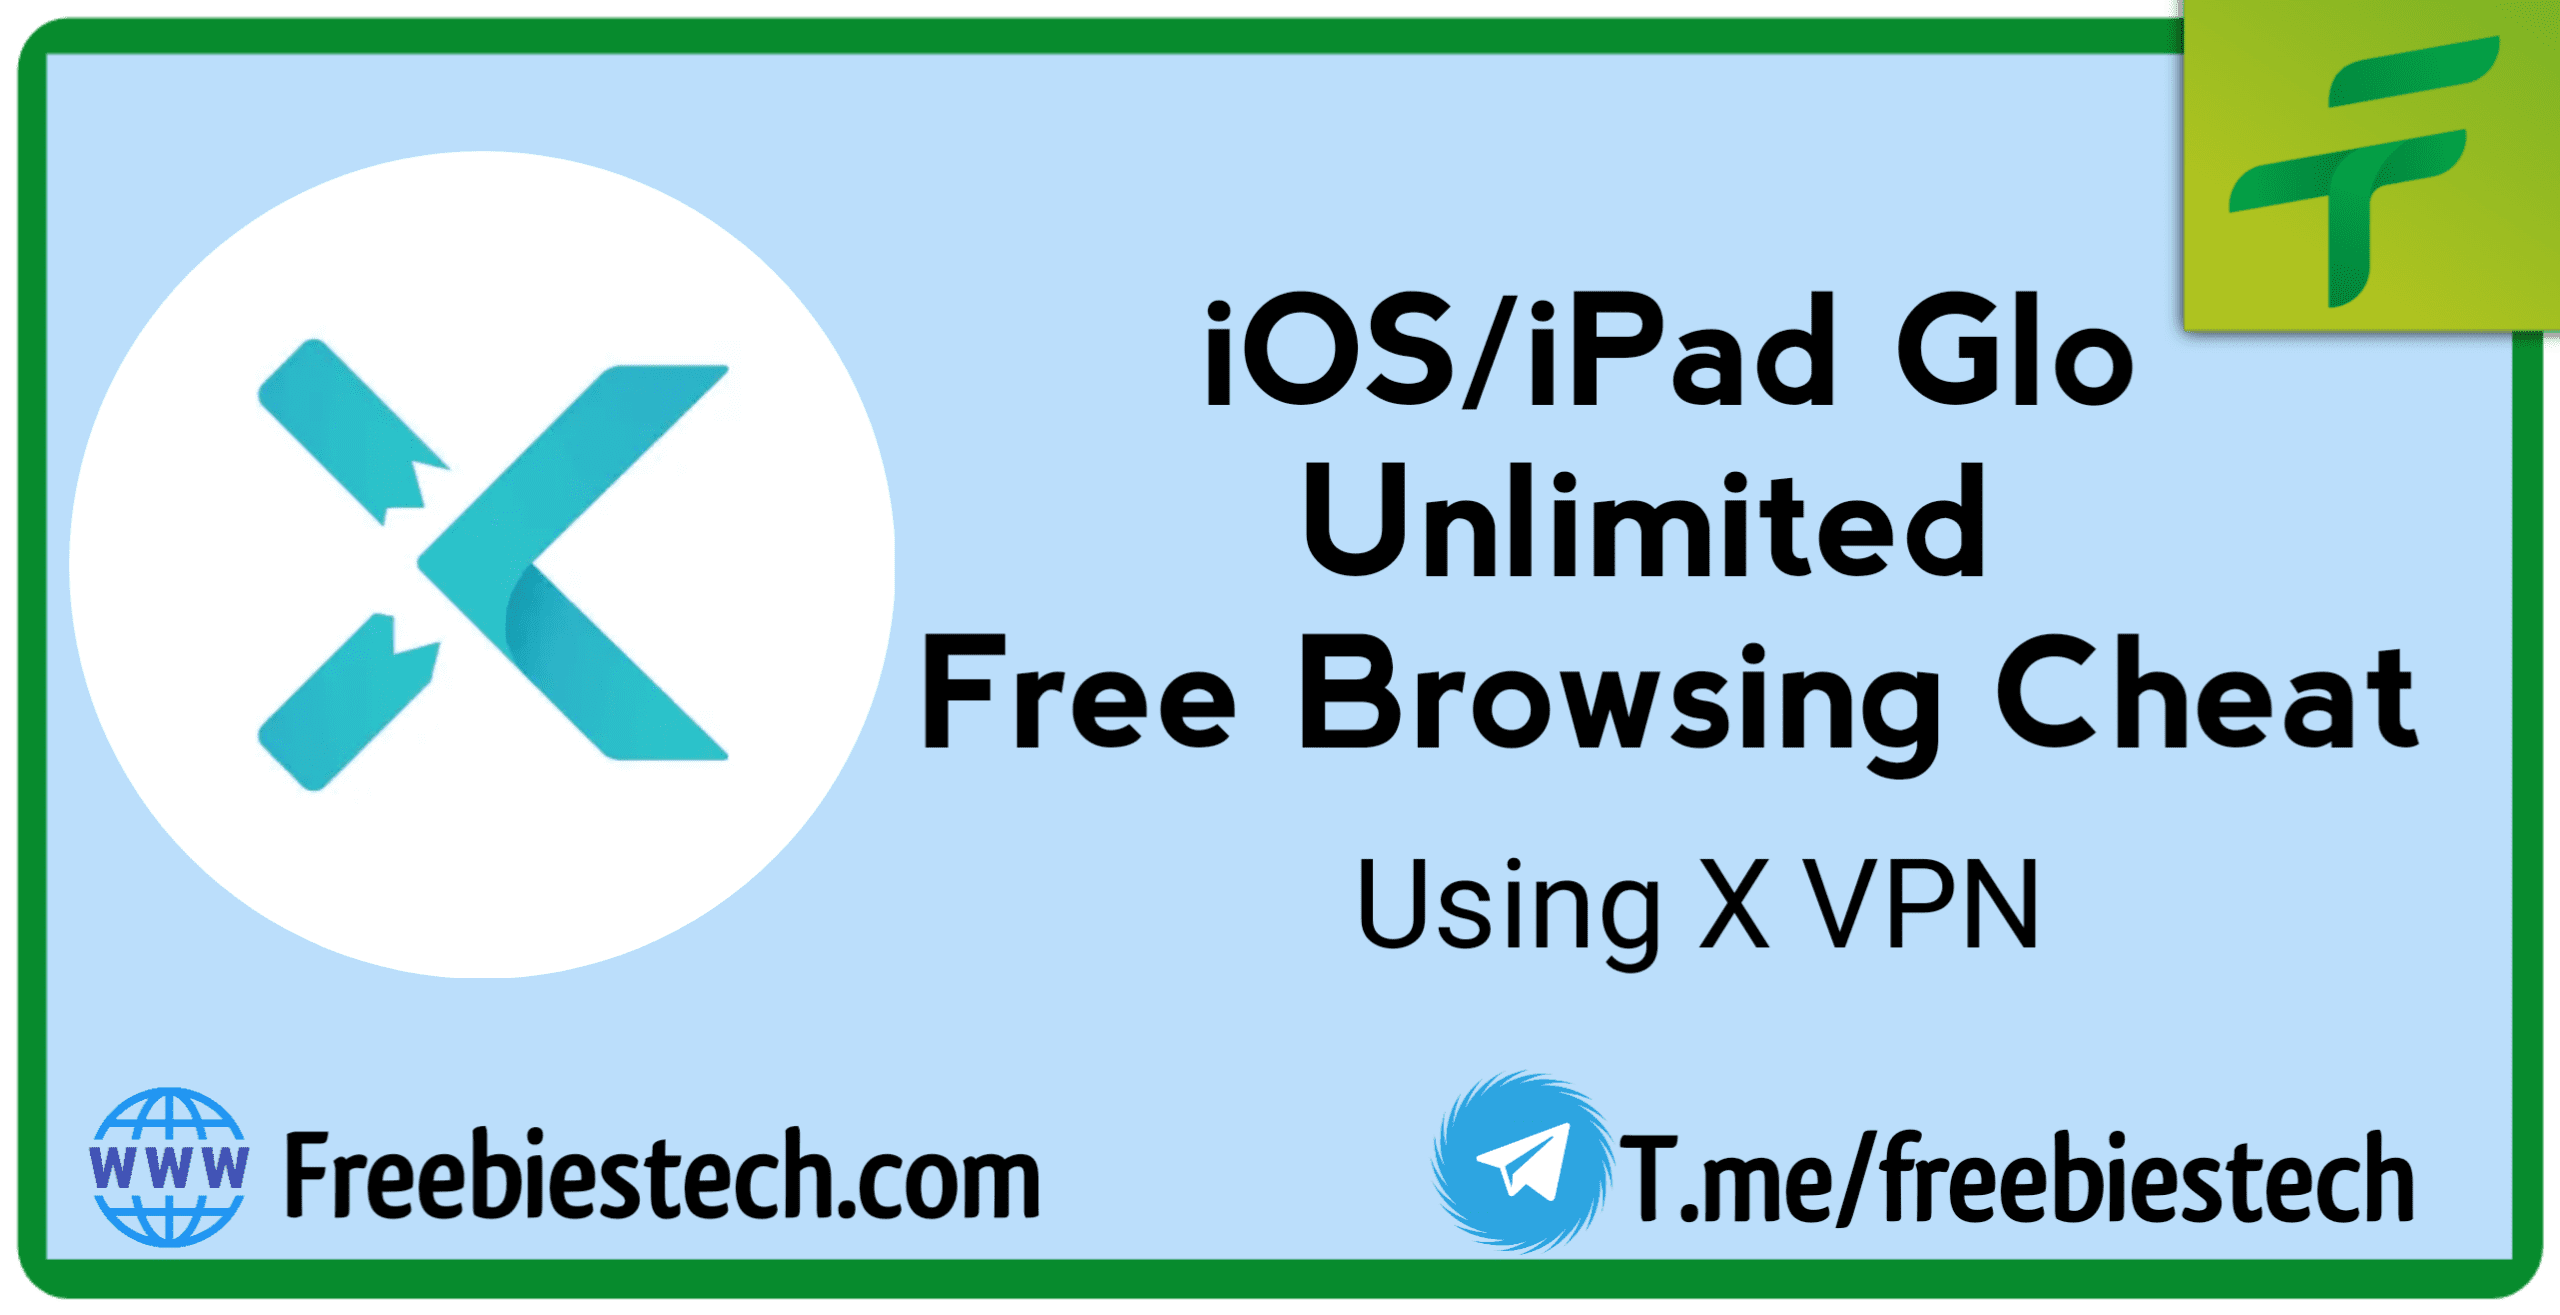 How To Use Glo Unlimited Free Browsing Cheat On iOS or iPad